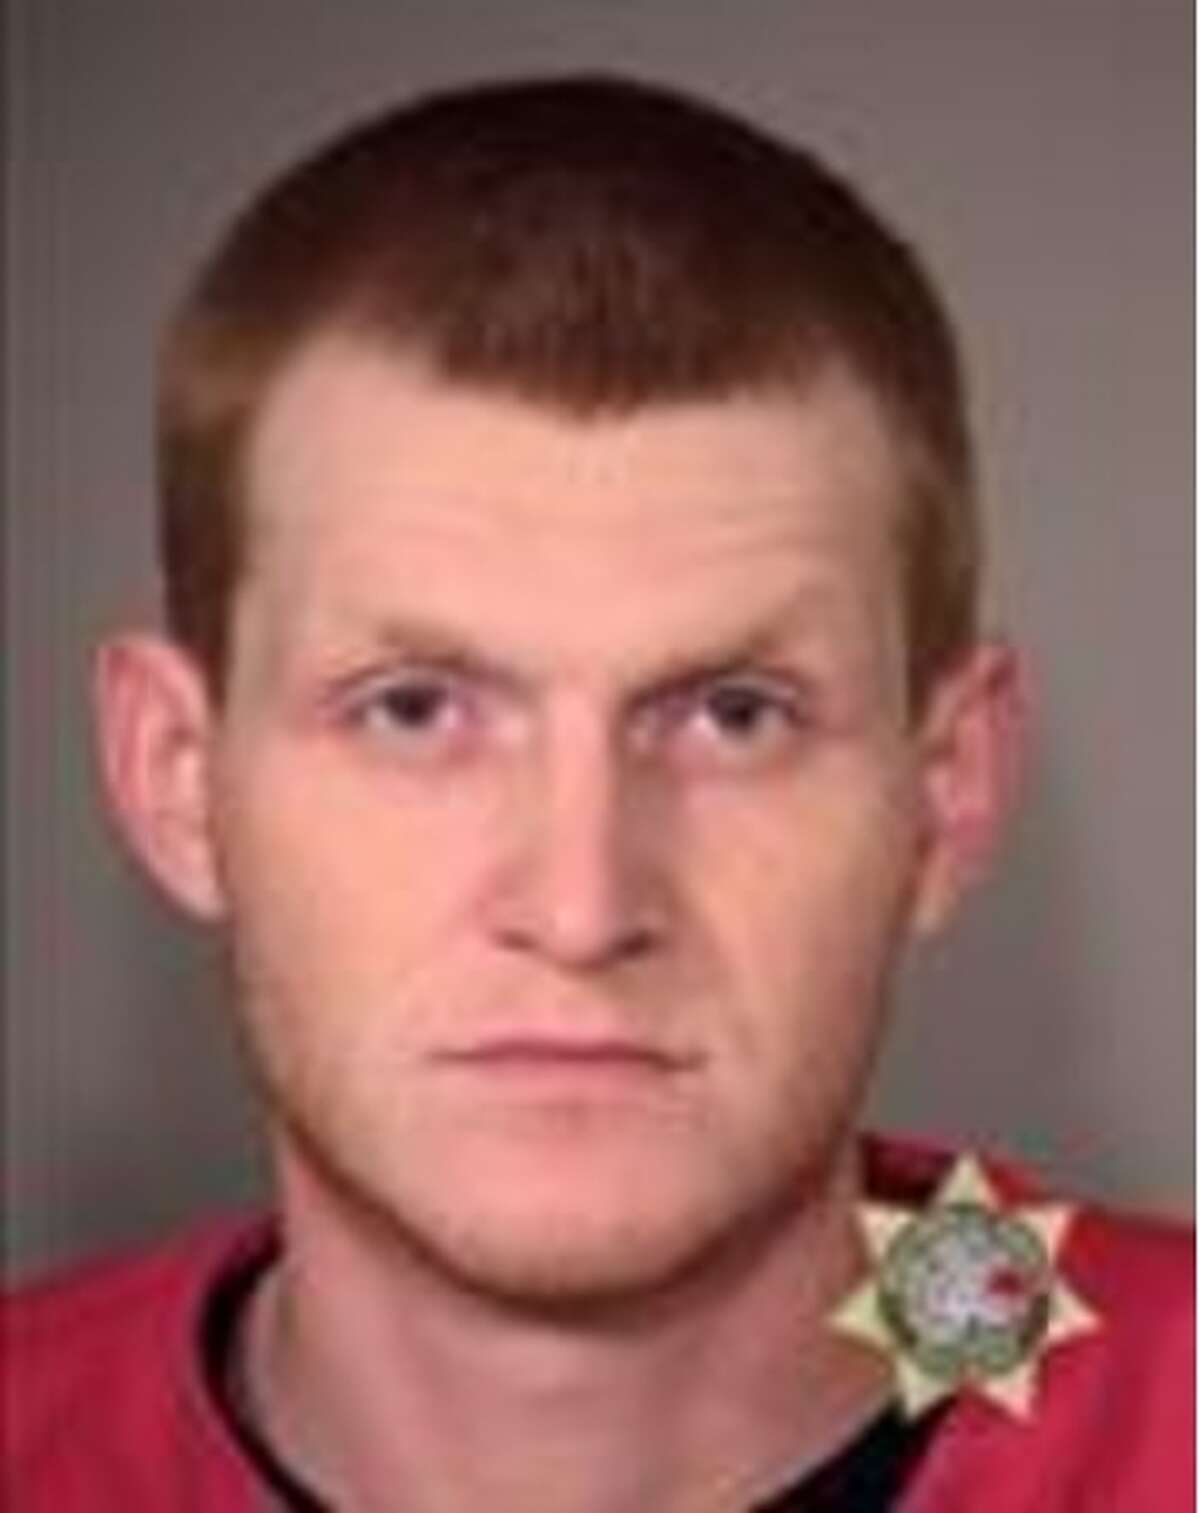 Chad Cameron Camp, was booked into Multnomah County Jail in Oregon June 16 and charged with abusive sexual contact after he allegedly inappropriately touched a 13-year-old girl on an American Airlines flight from the Dallas to Portland June 15, according to the CNN.